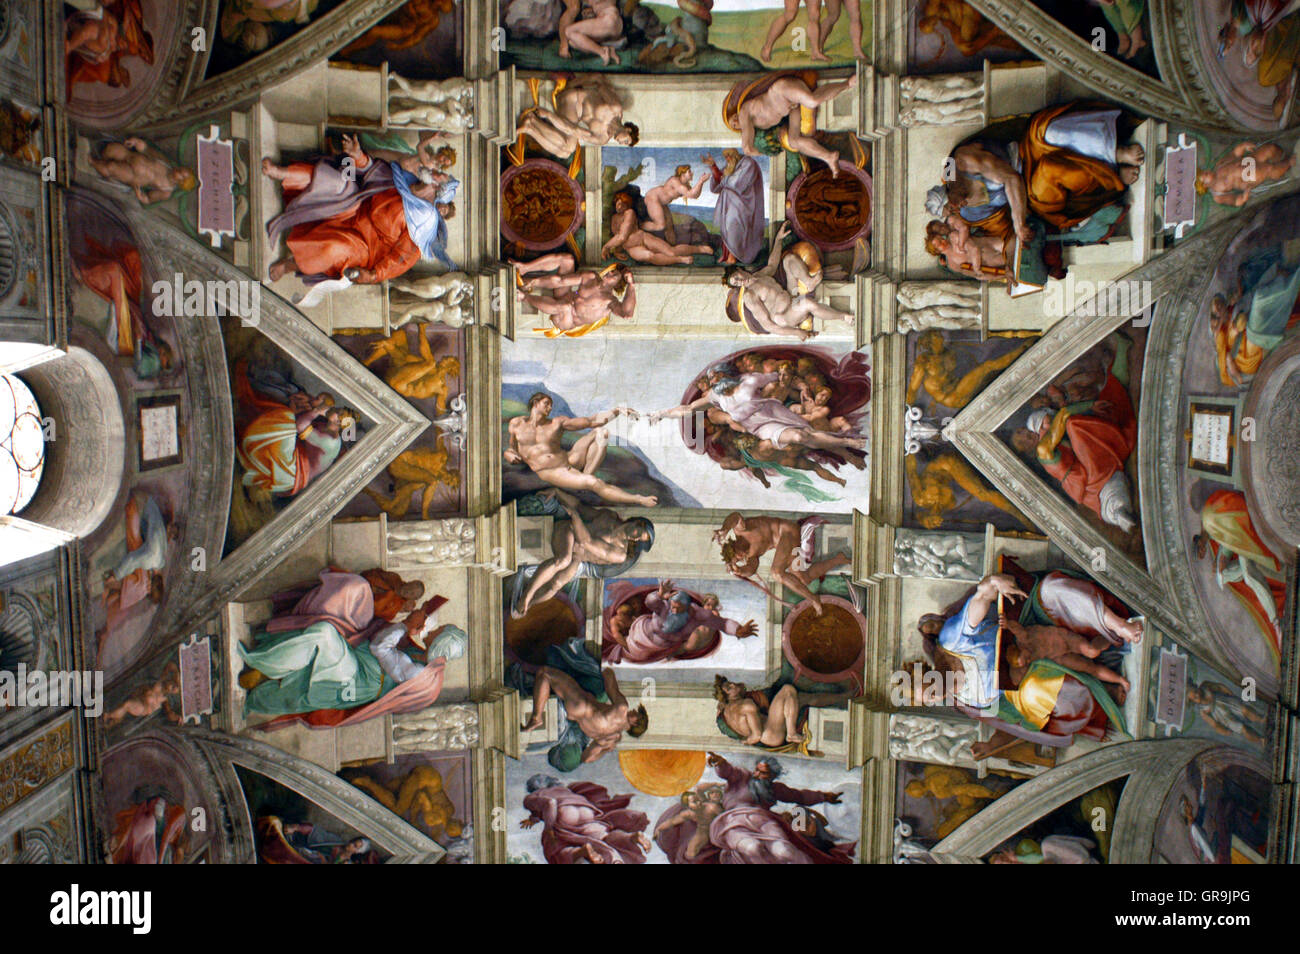 Ceiling of Sistine Chapel Vatican museum Rome Italy.The Creation of Adam by Michelangelo on the ceiling of the Sistine Chapel in the Vatican Museum. Stock Photo